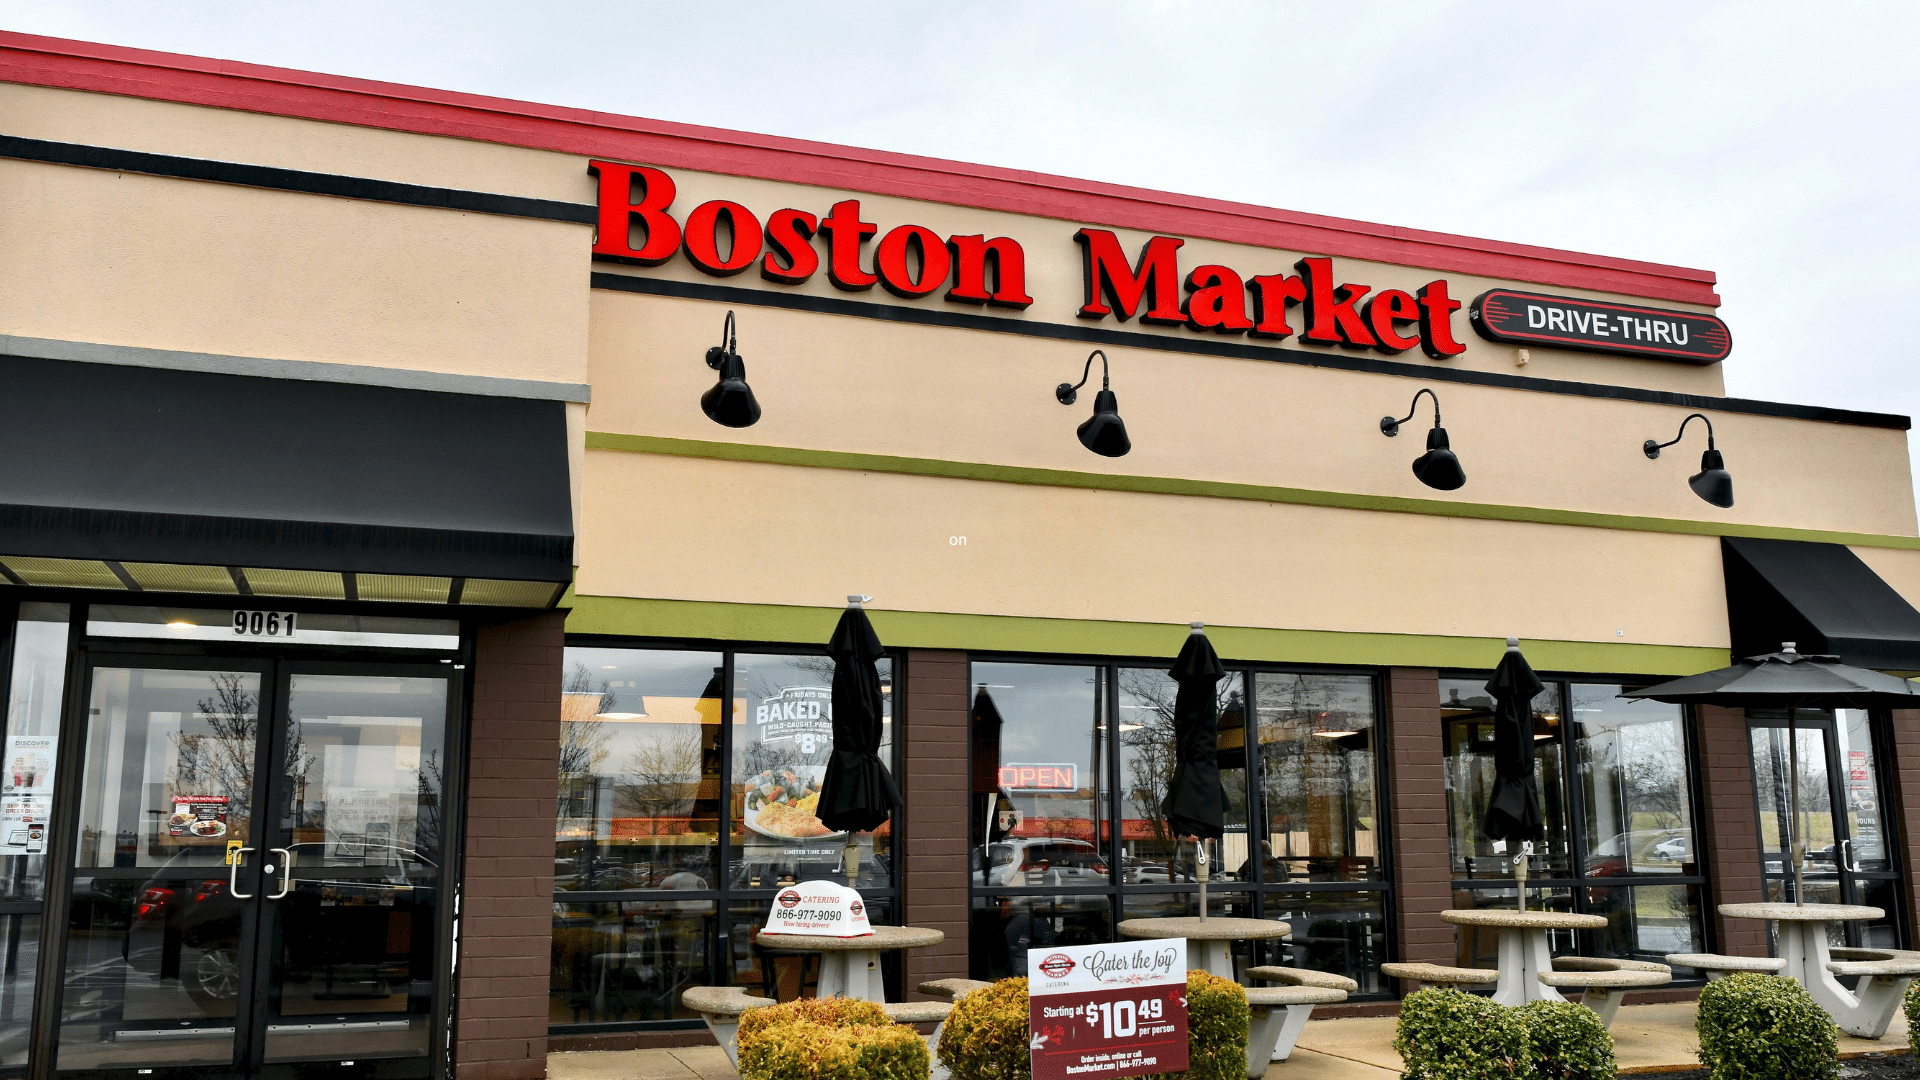 Fast Food Franchise Boston Market Is Facing Its Last Days After a Failed Chapter 11 Bankruptcy